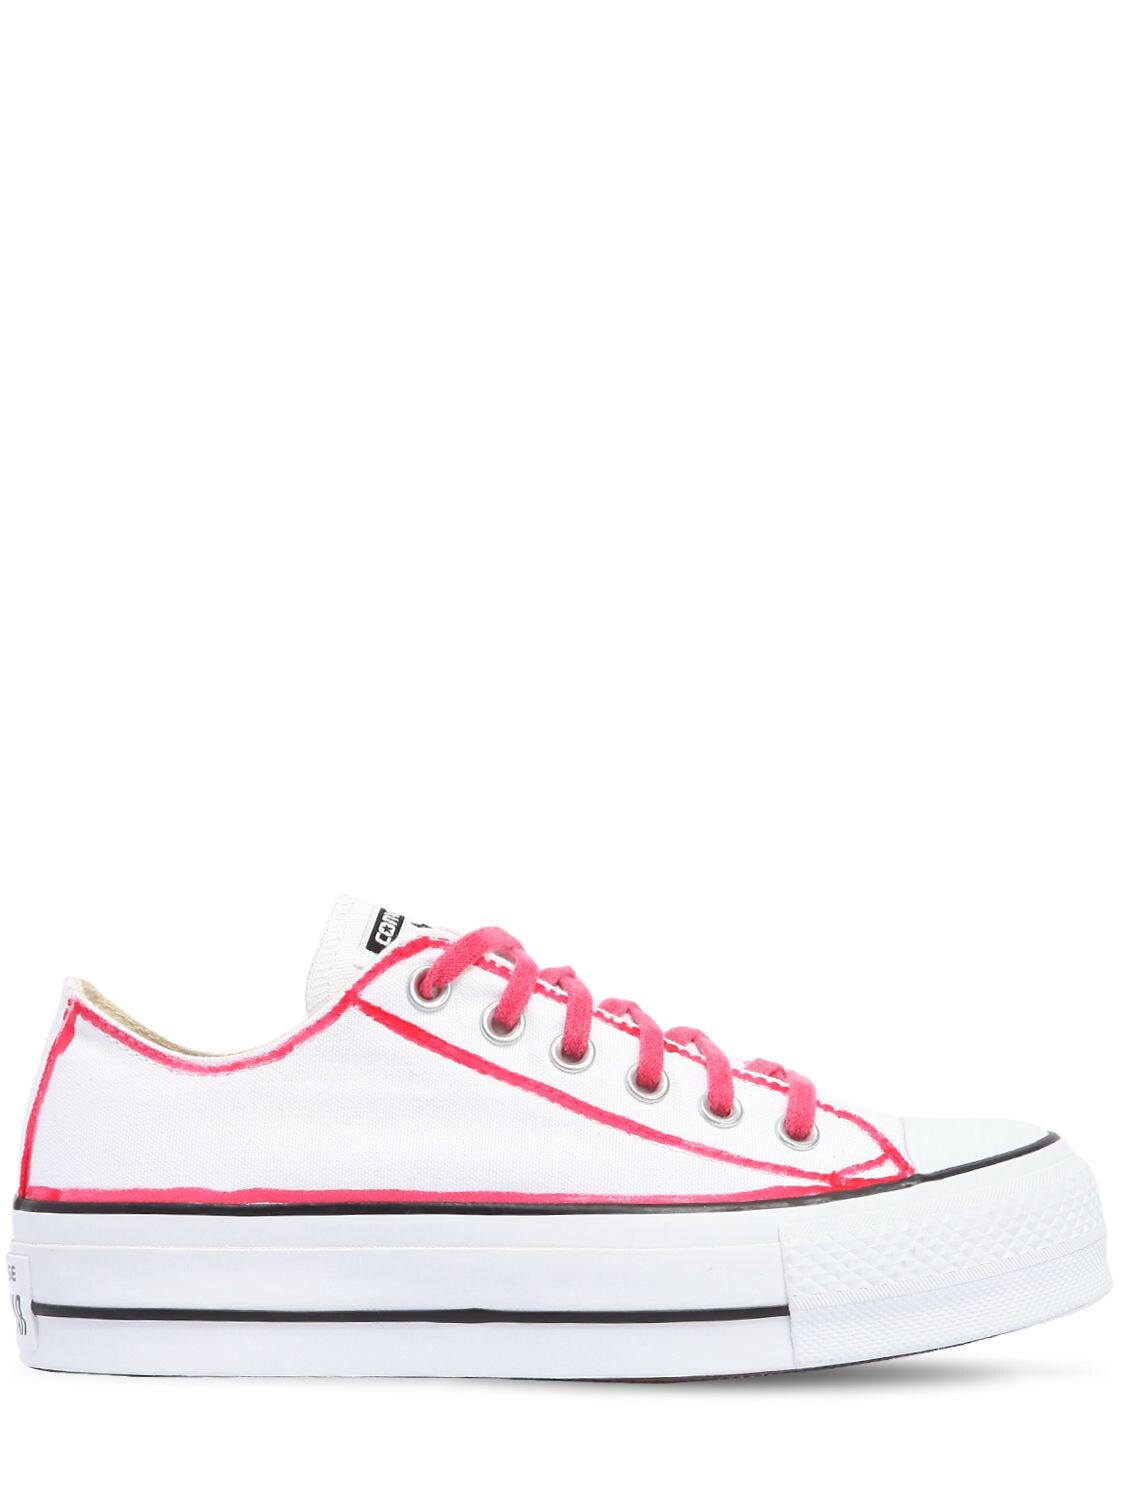 Converse 40mm Lift Canvas Platform Sneakers In White/red